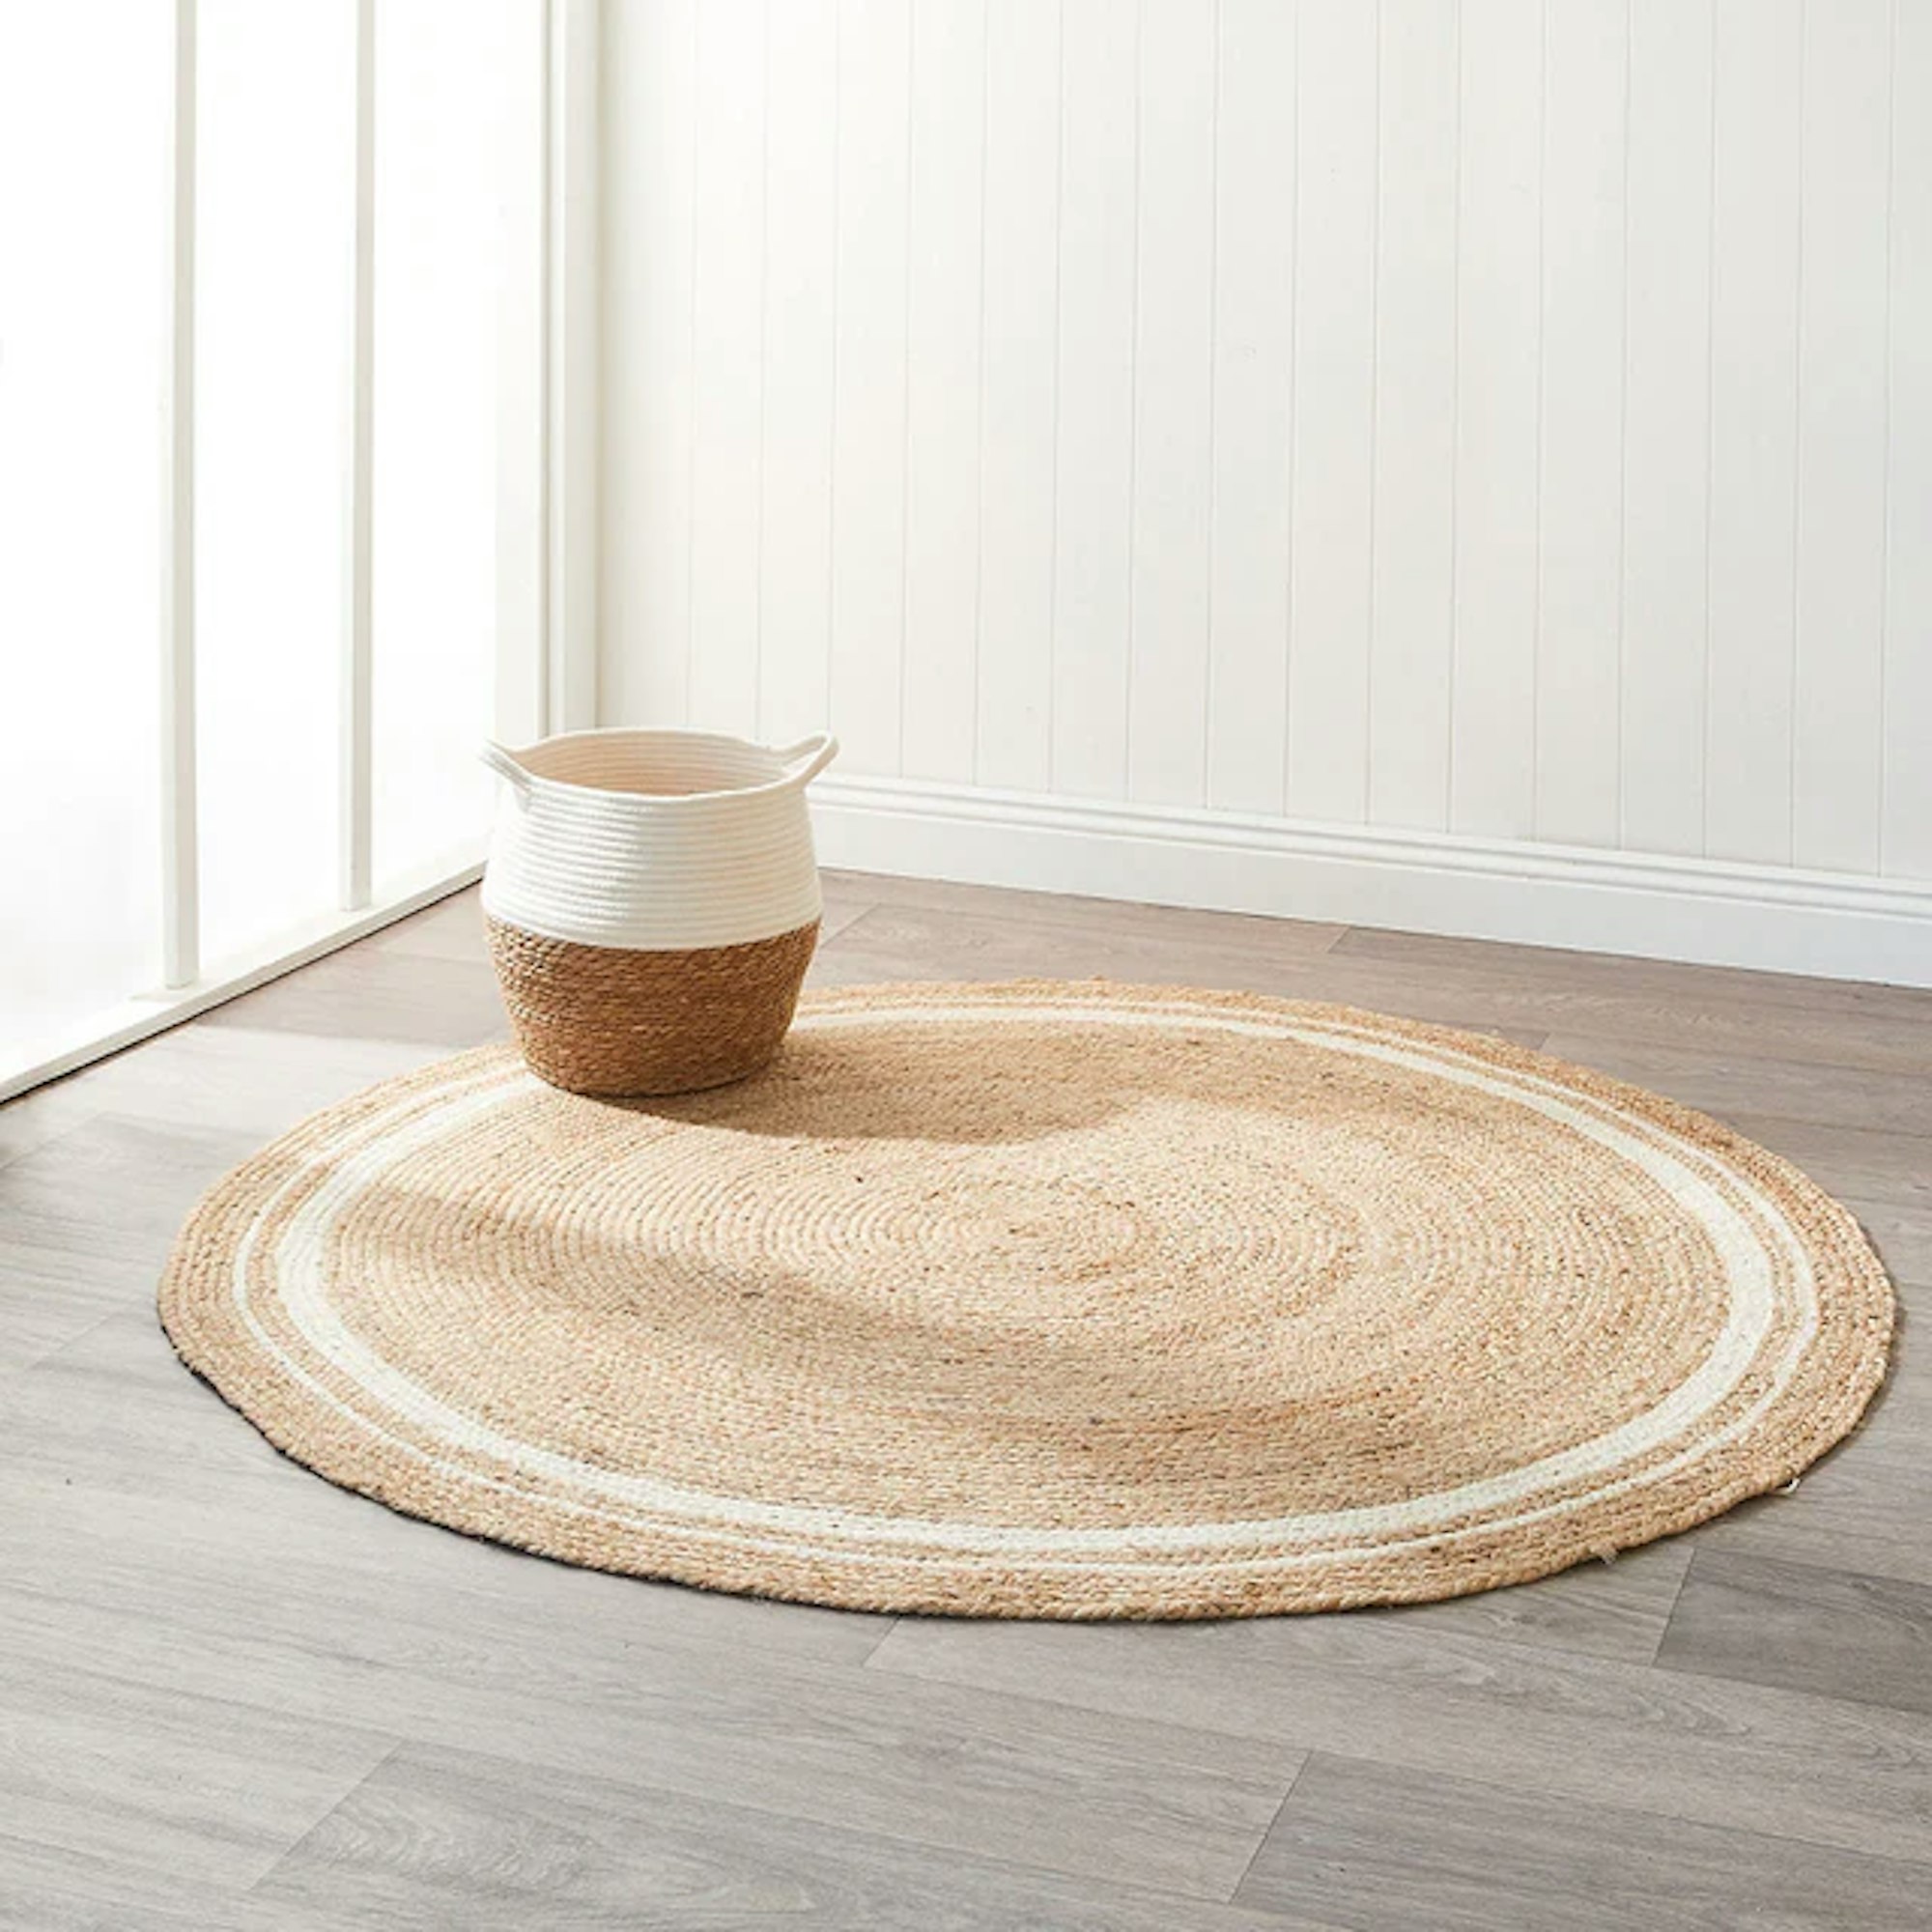 Round rug with wooden basket sitting on top